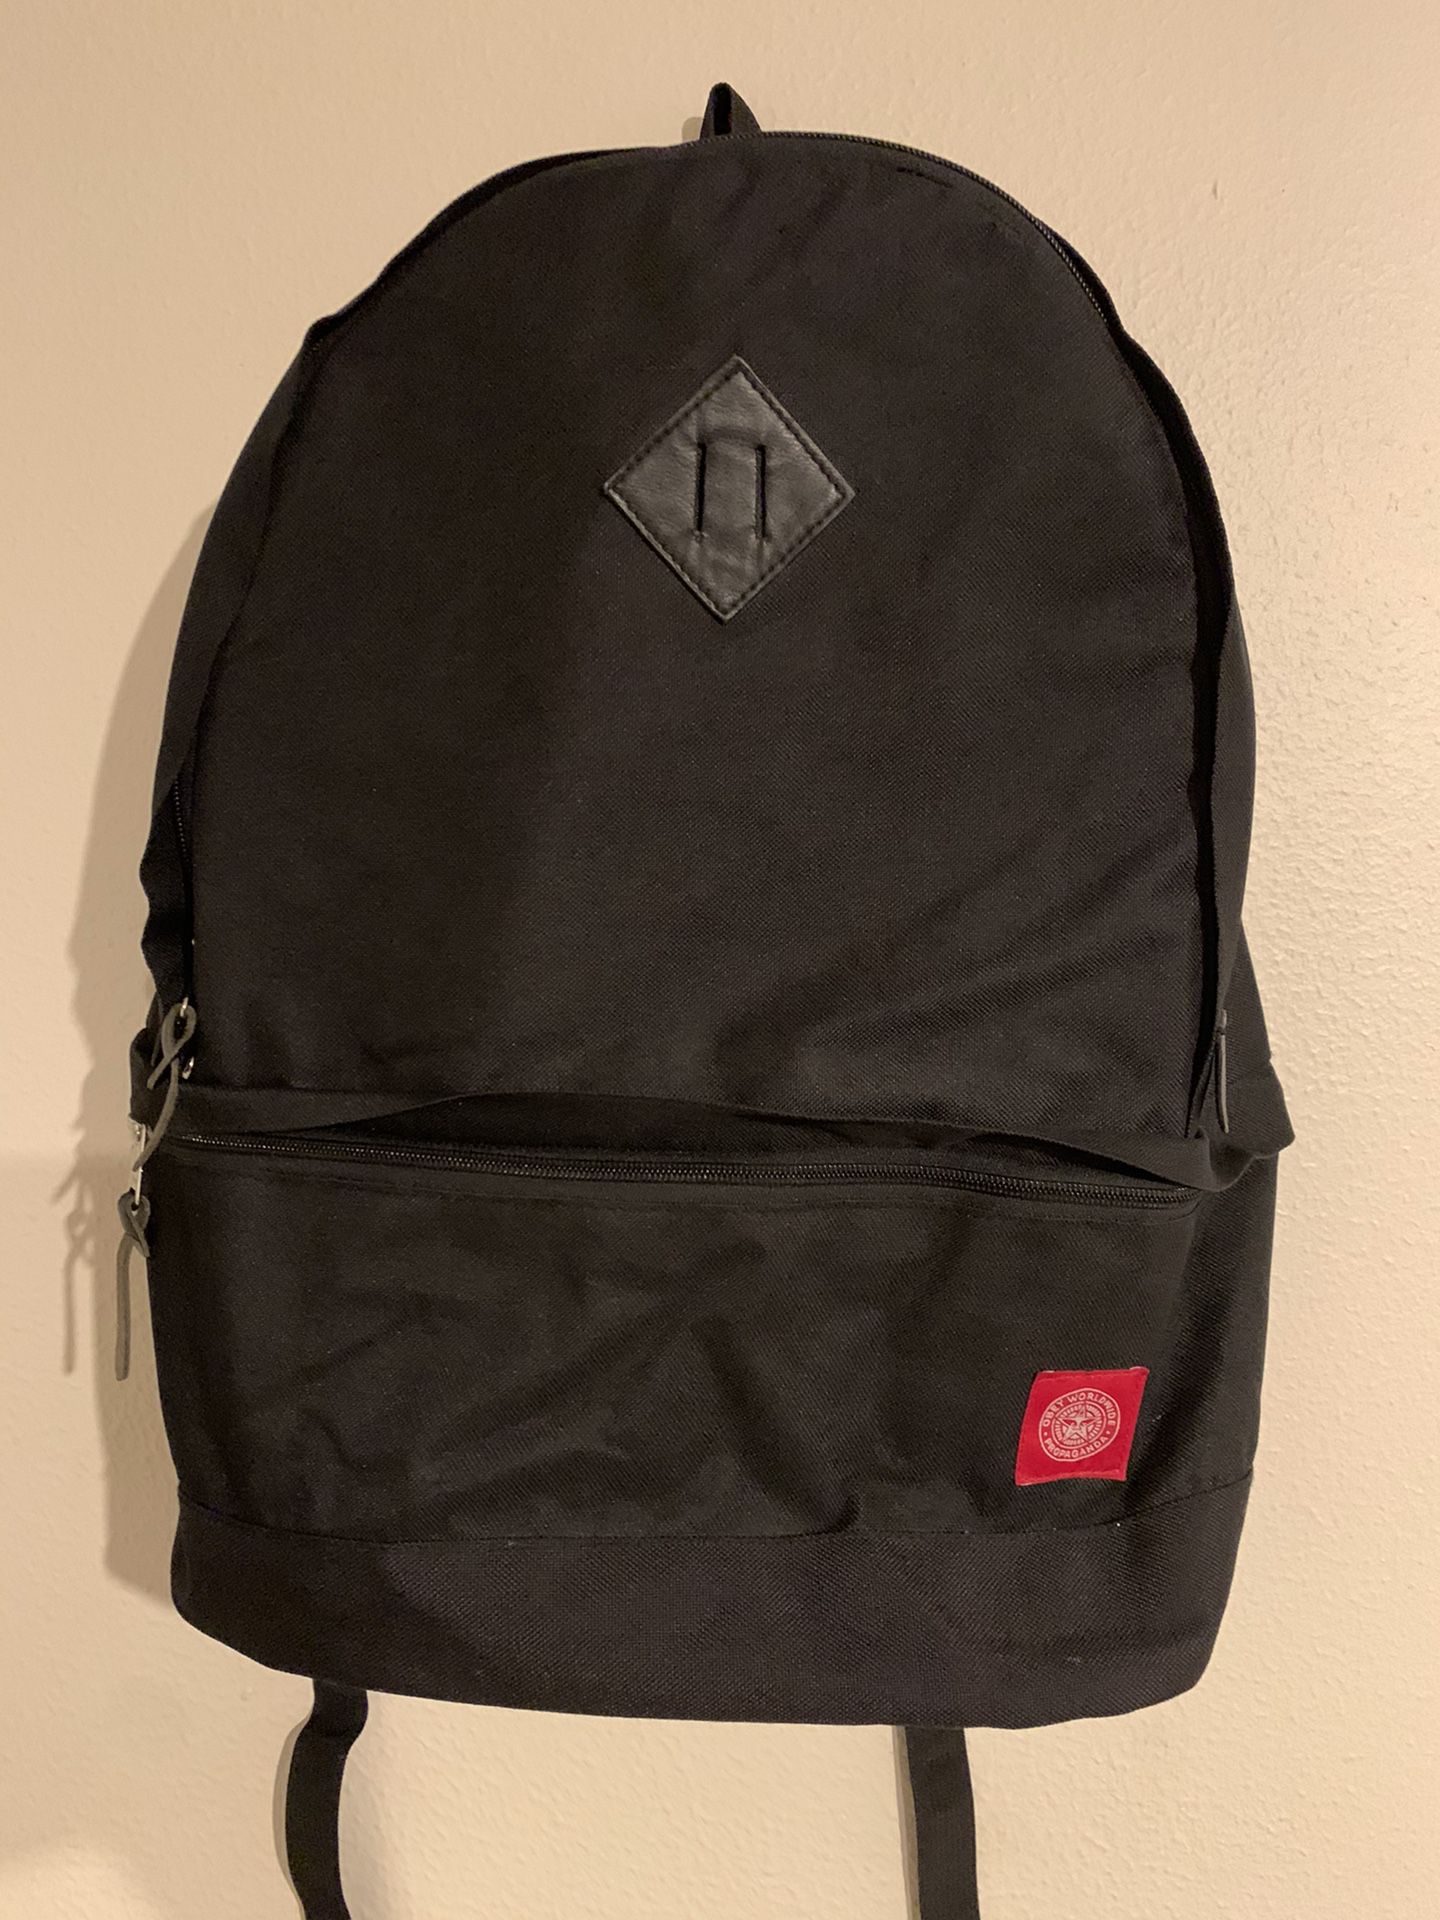 OBEY backpack